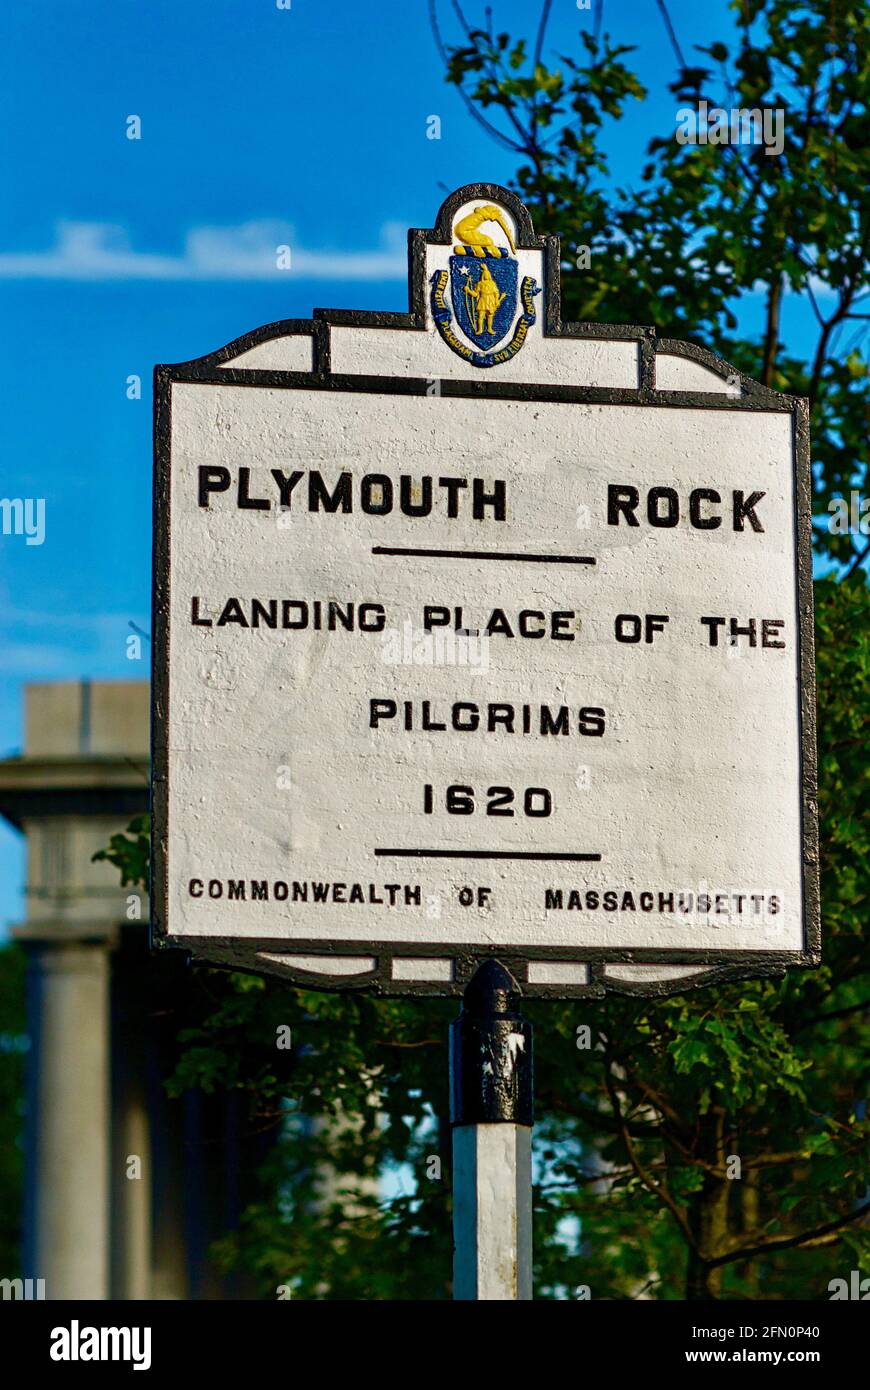 Plymouth, Massachusetts, USA - July 2, 2019: A sign for Plymouth Rock near the location where the Pilgrims of the Massachusetts Bay Colony came ashore. Stock Photo